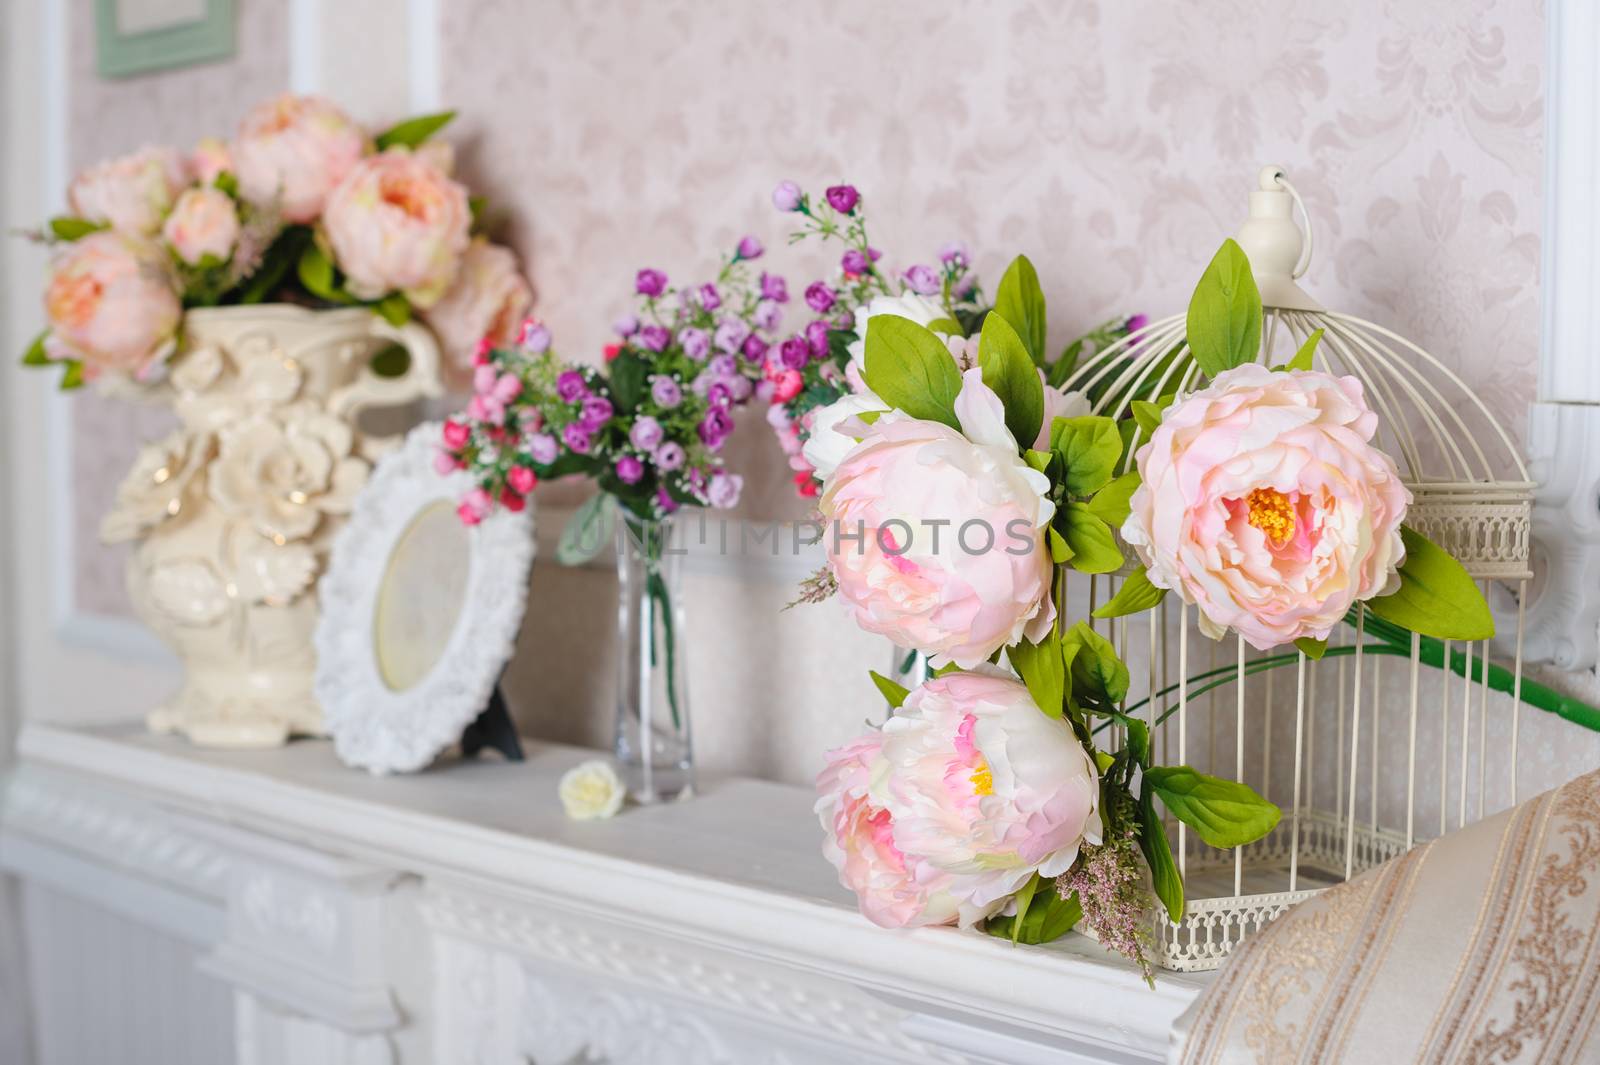 decorations with flowers on the shelf in the interior in the living room.